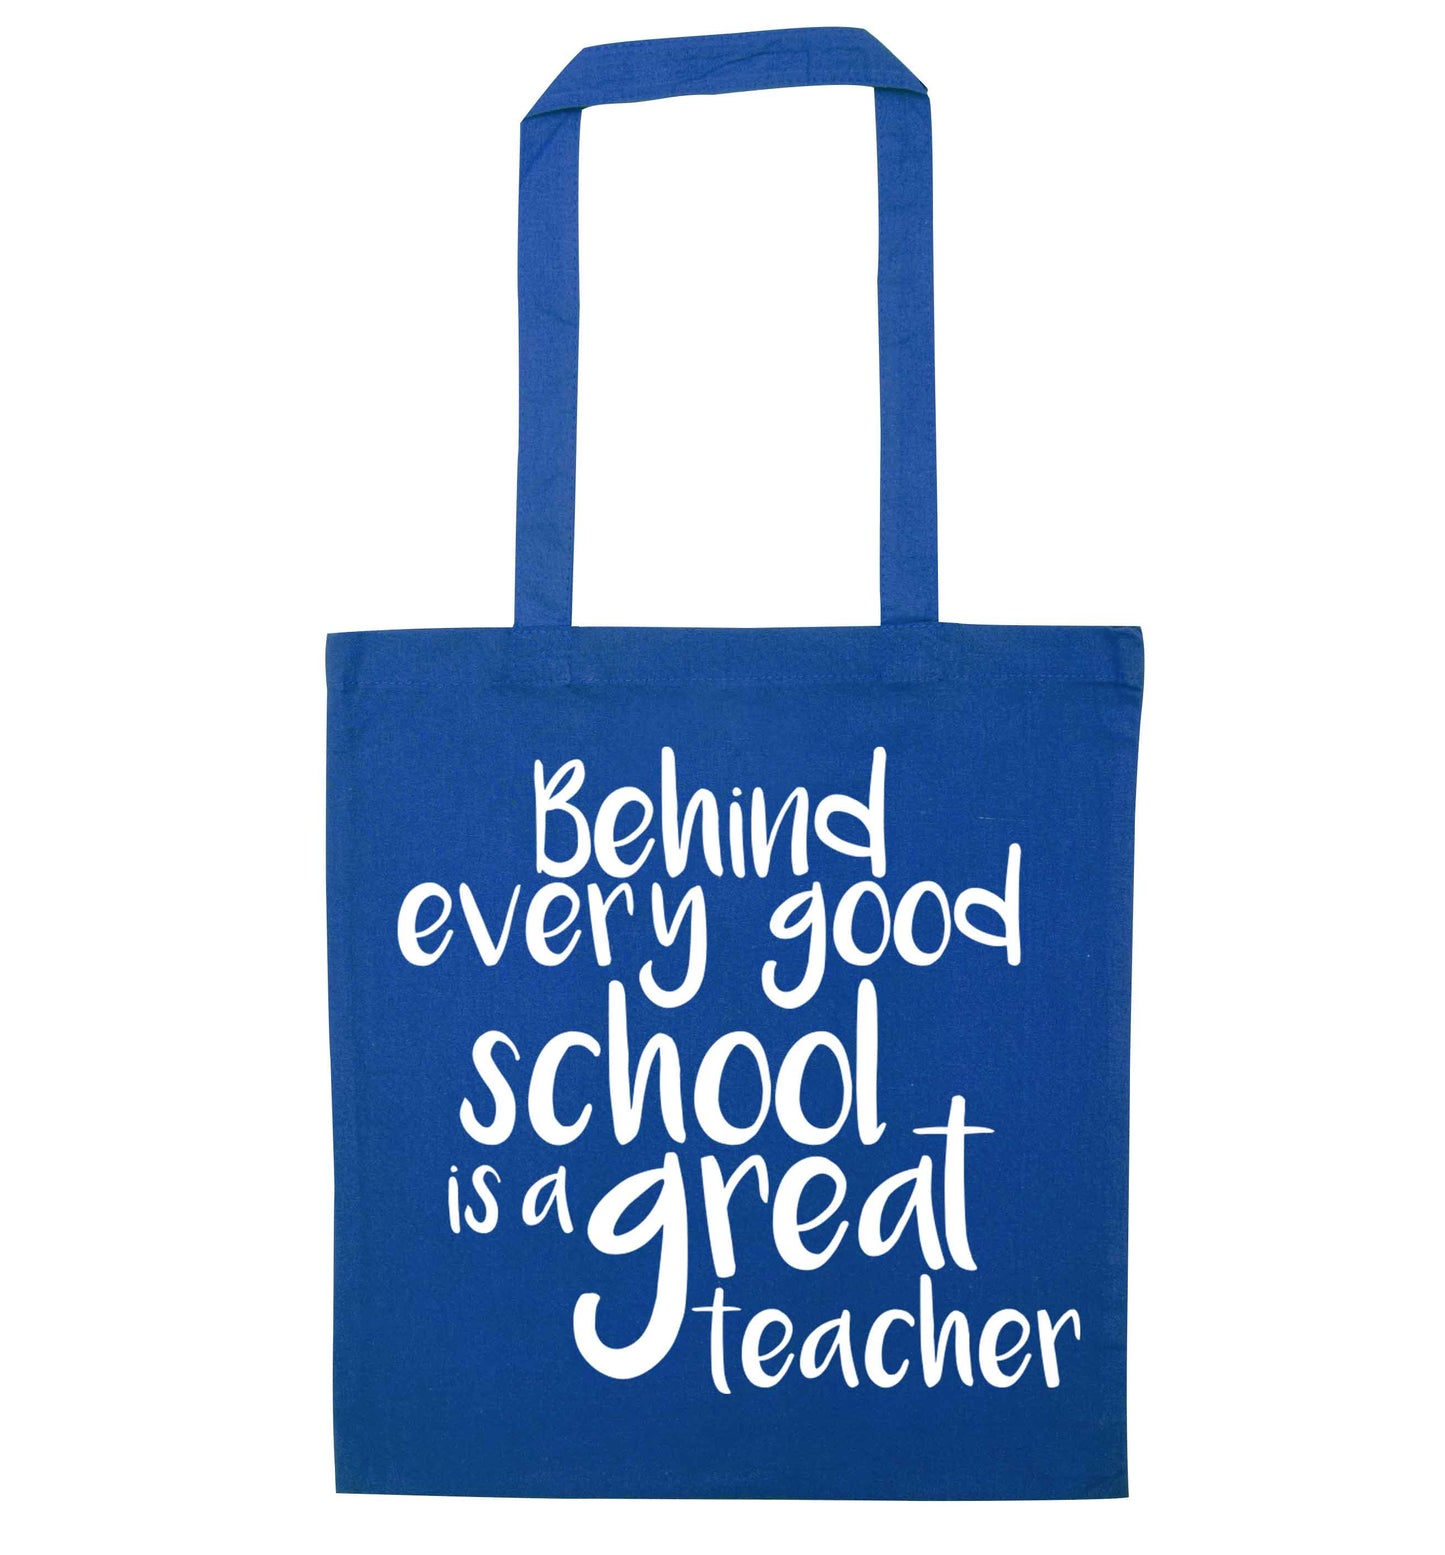 Behind every good school is a great teacher blue tote bag